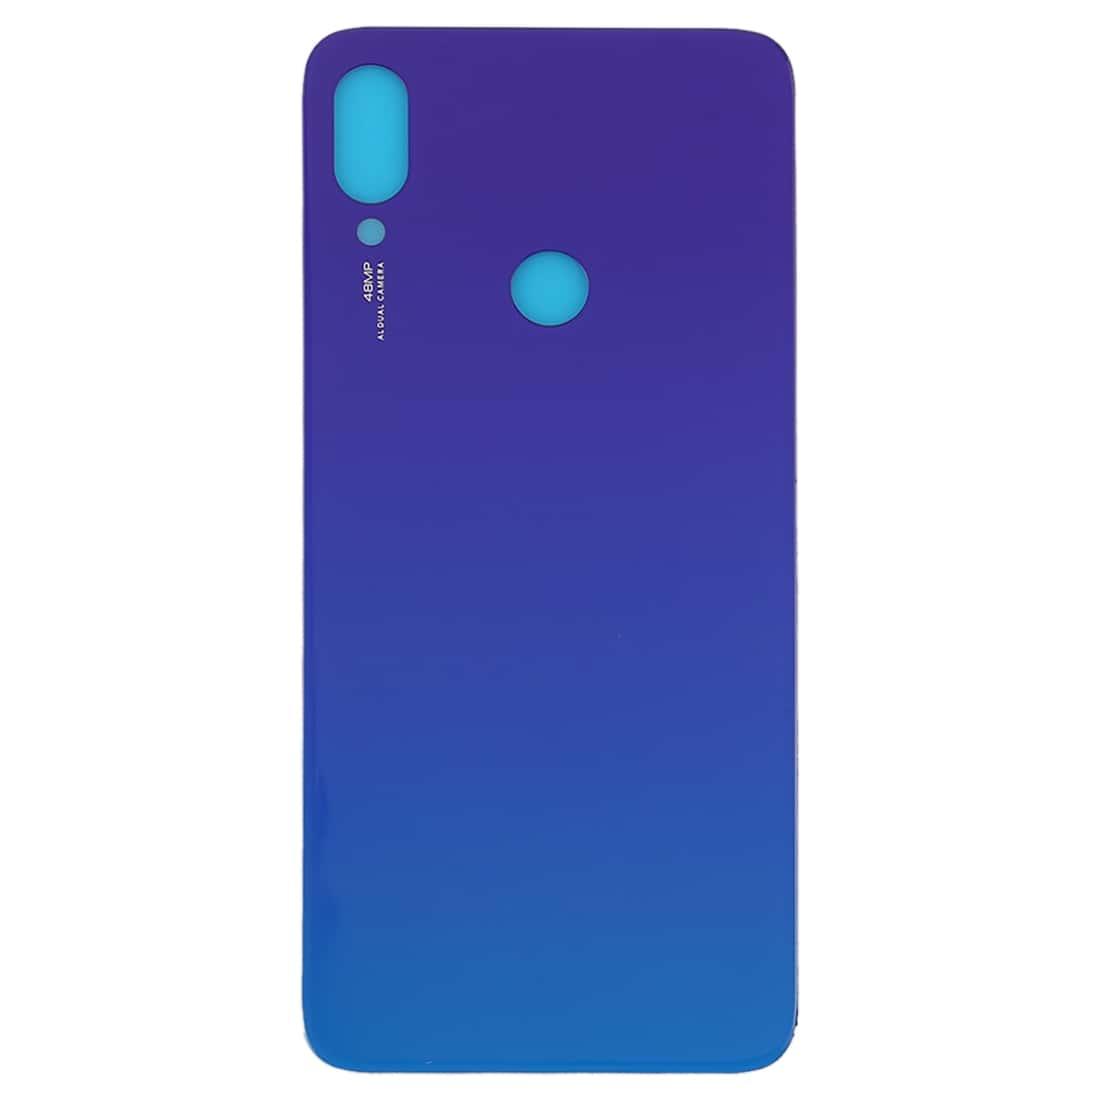 Back Glass Panel for  Xiaomi Redmi Note 7 Blue